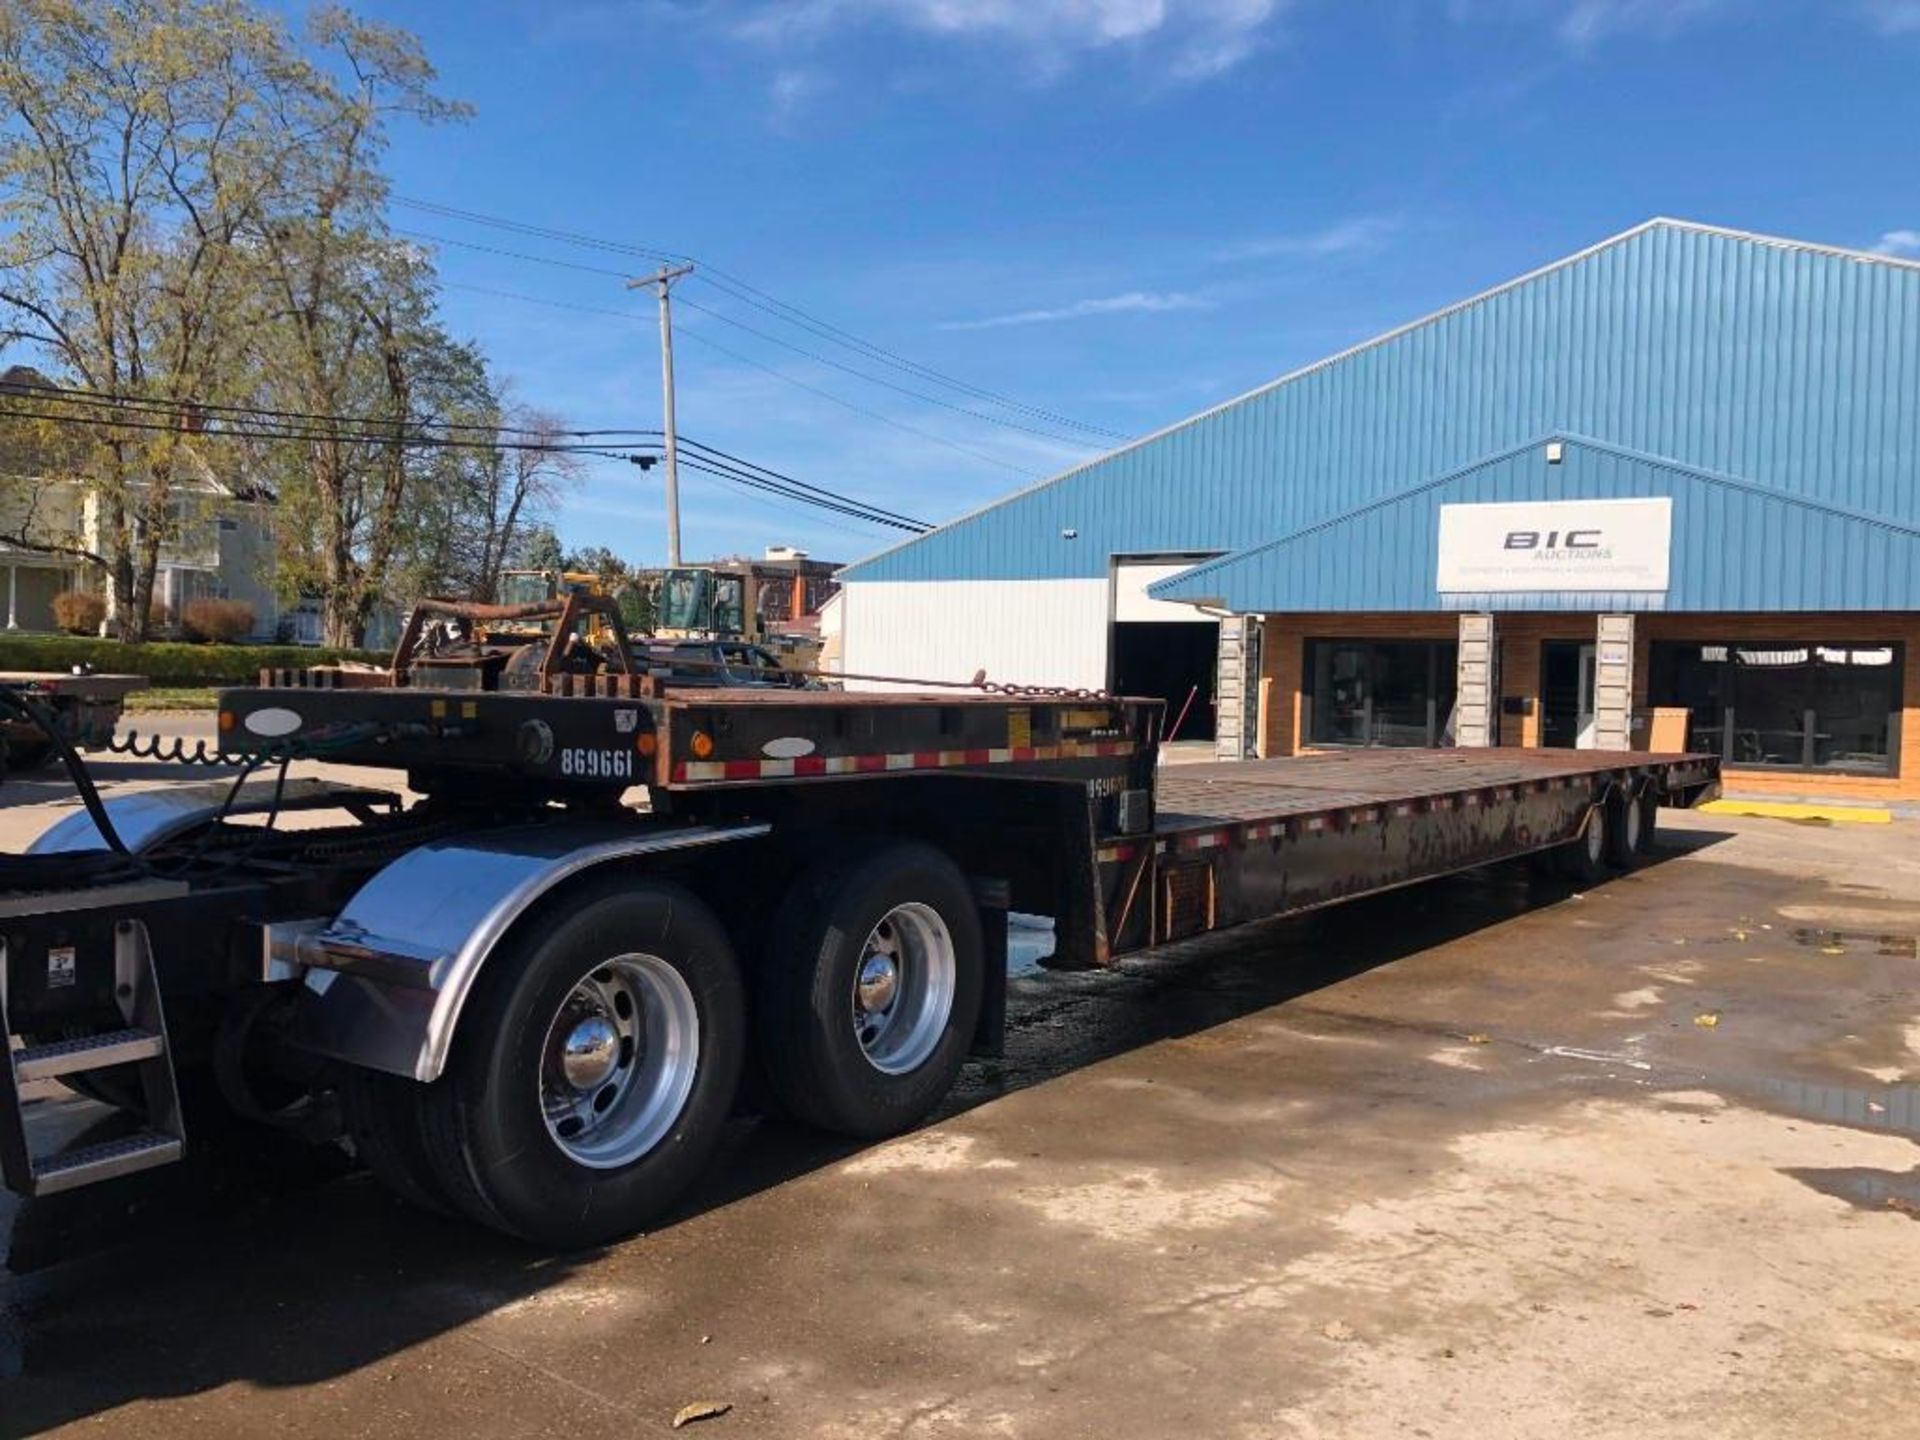 2011 Ledwell Hydratail Trailer Tandem Axle, VIN #1L9GA72A8BL033169, Model #LW4 with winch and scale. - Image 2 of 18